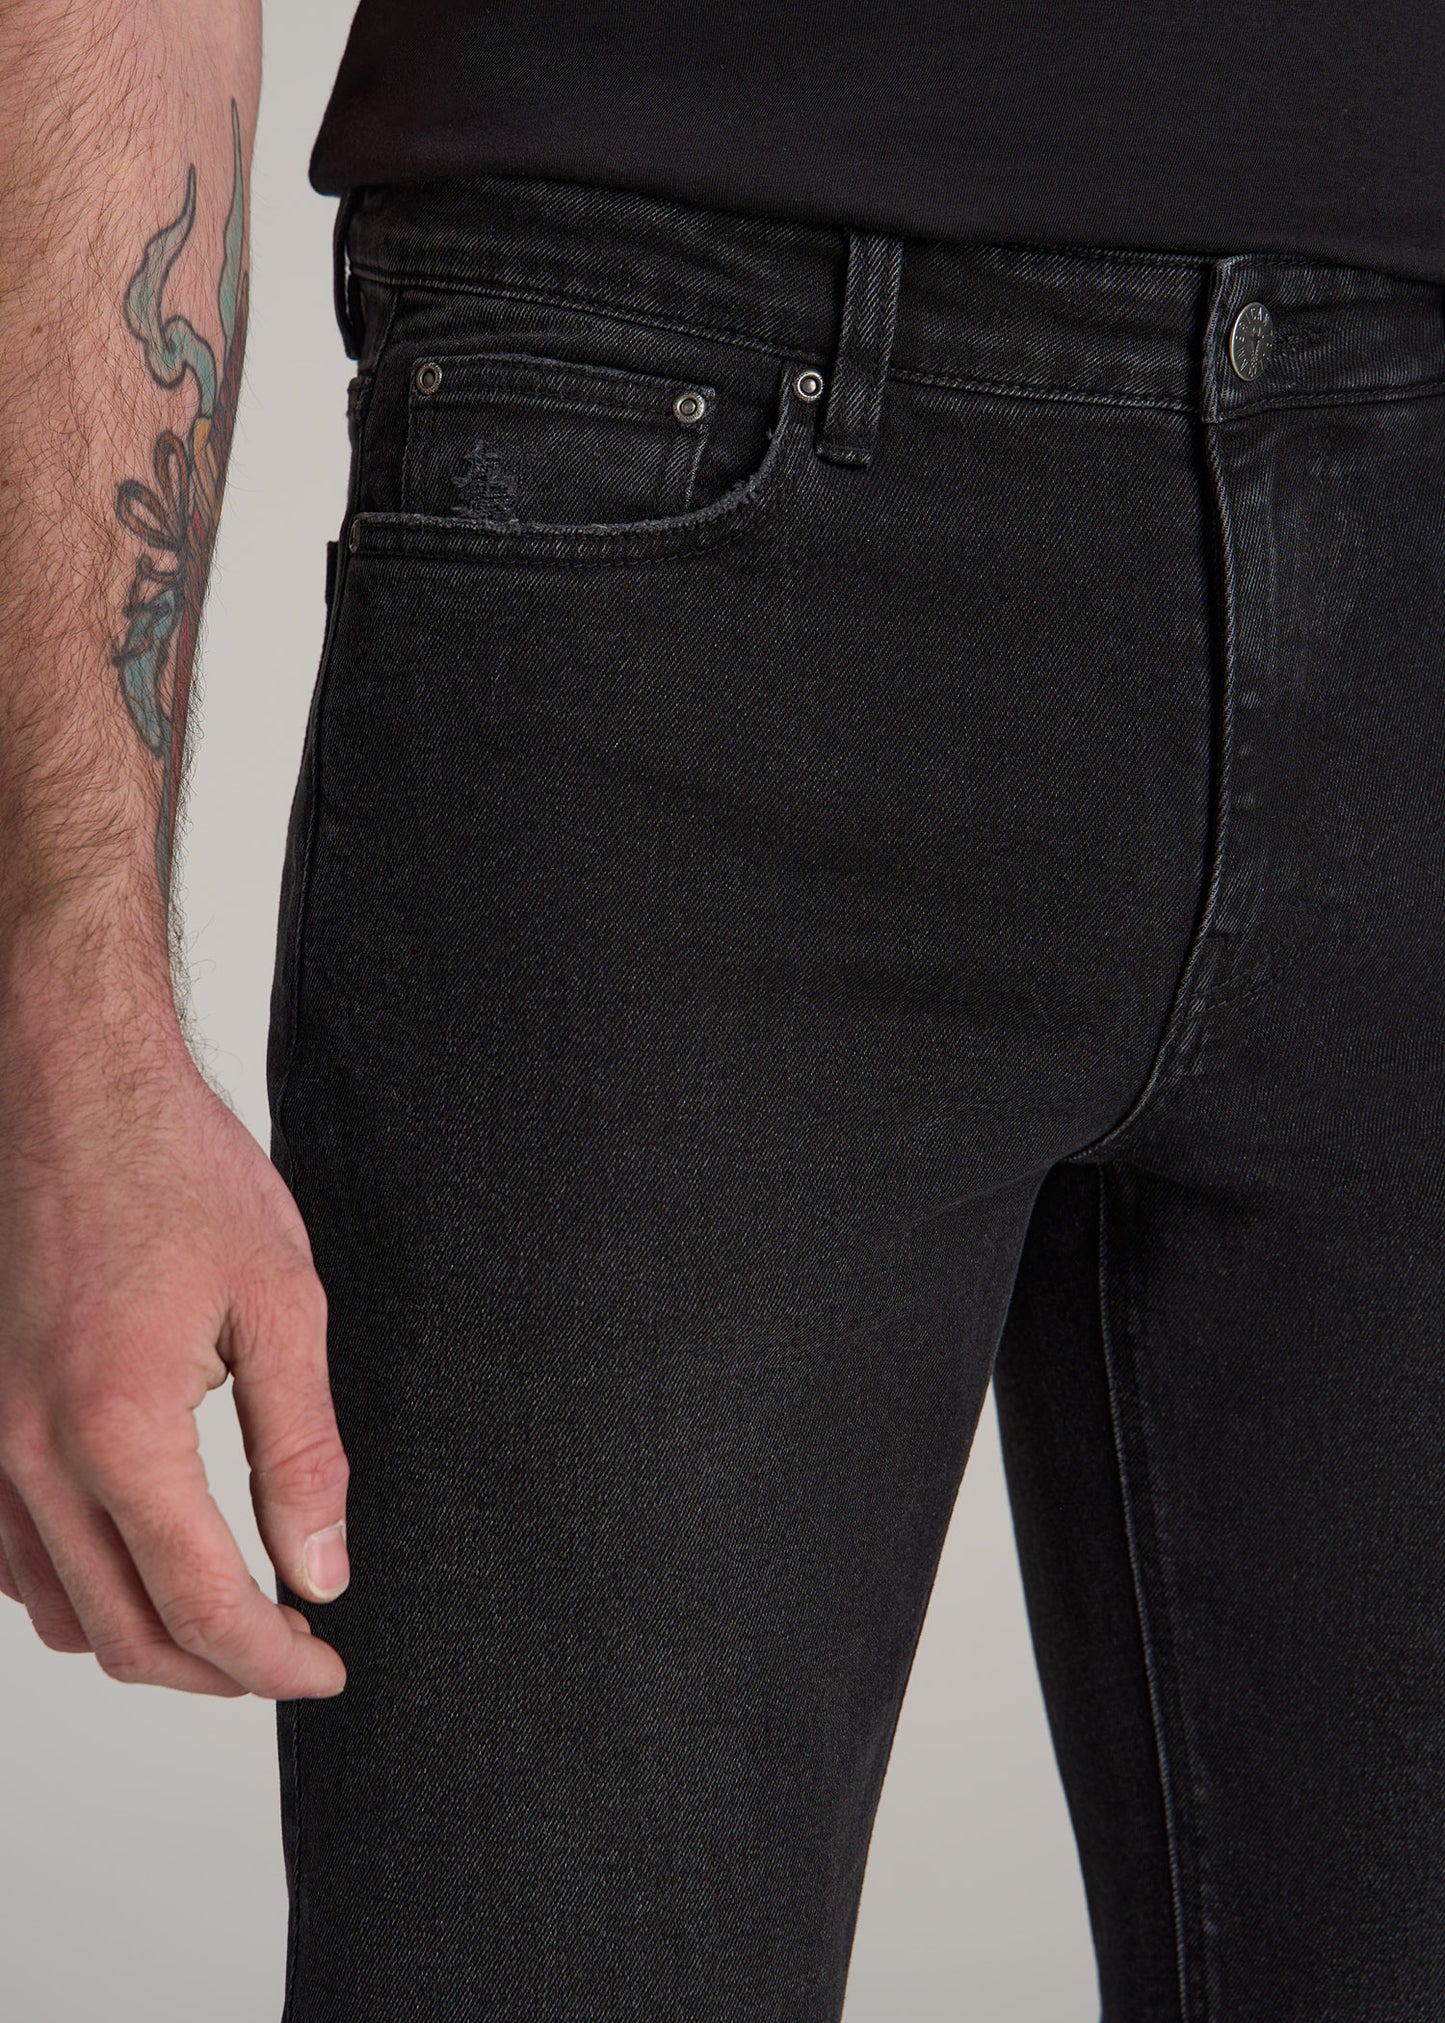 Dylan SLIM-FIT Jeans for Tall Men in Distressed Onyx Black Wash